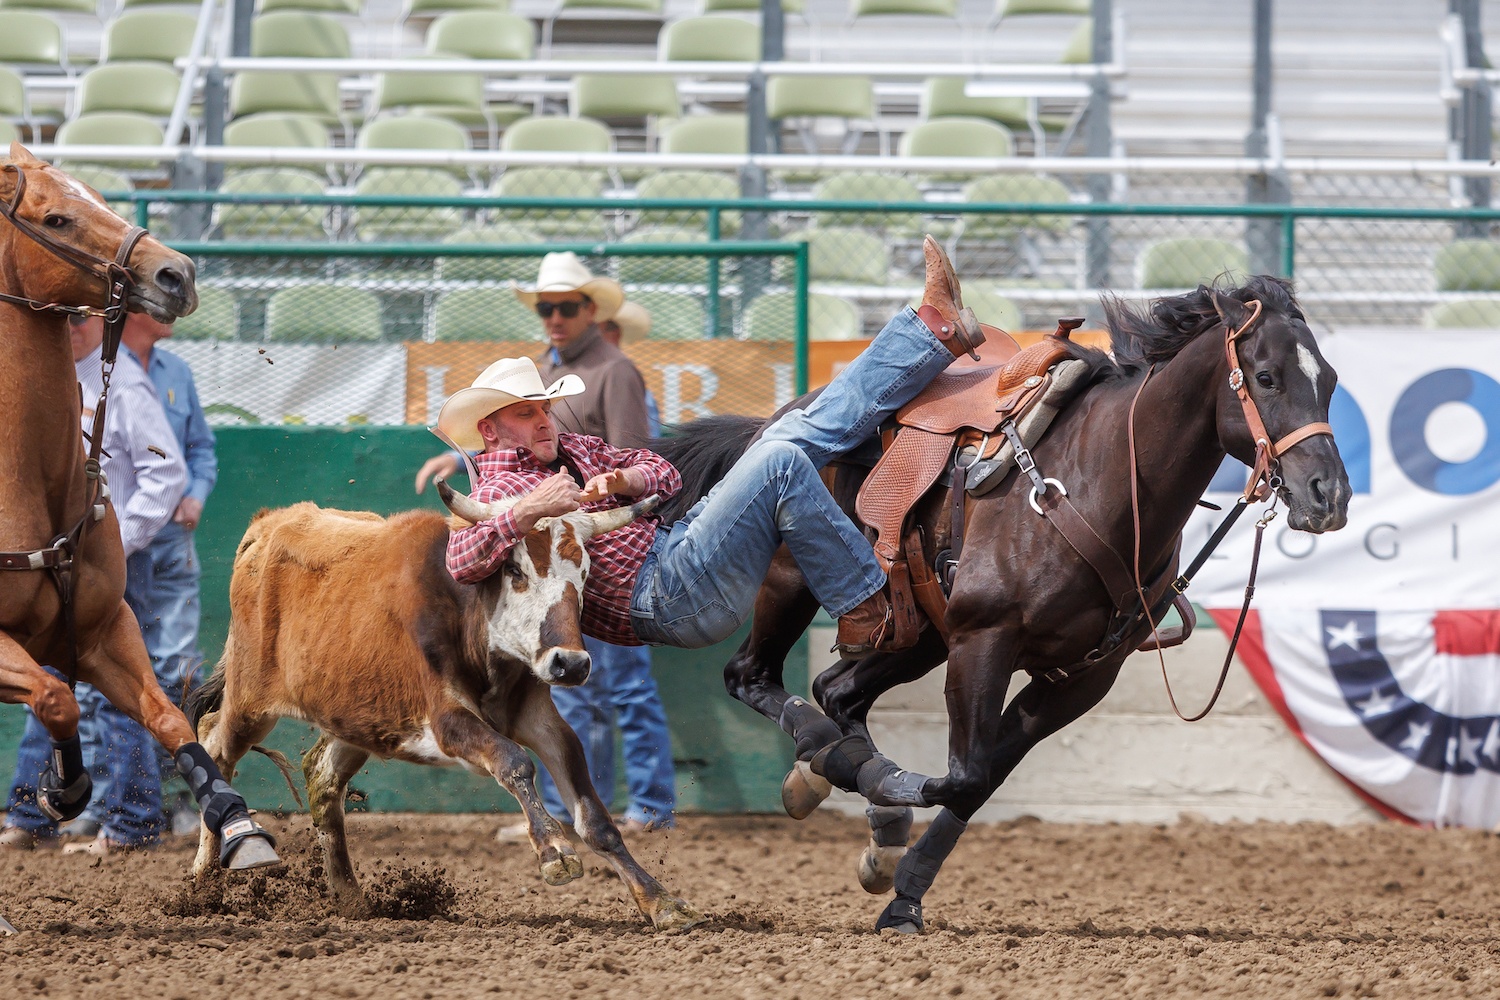 Riding, Roping and Racing More Ways to Experience the Reno Rodeo